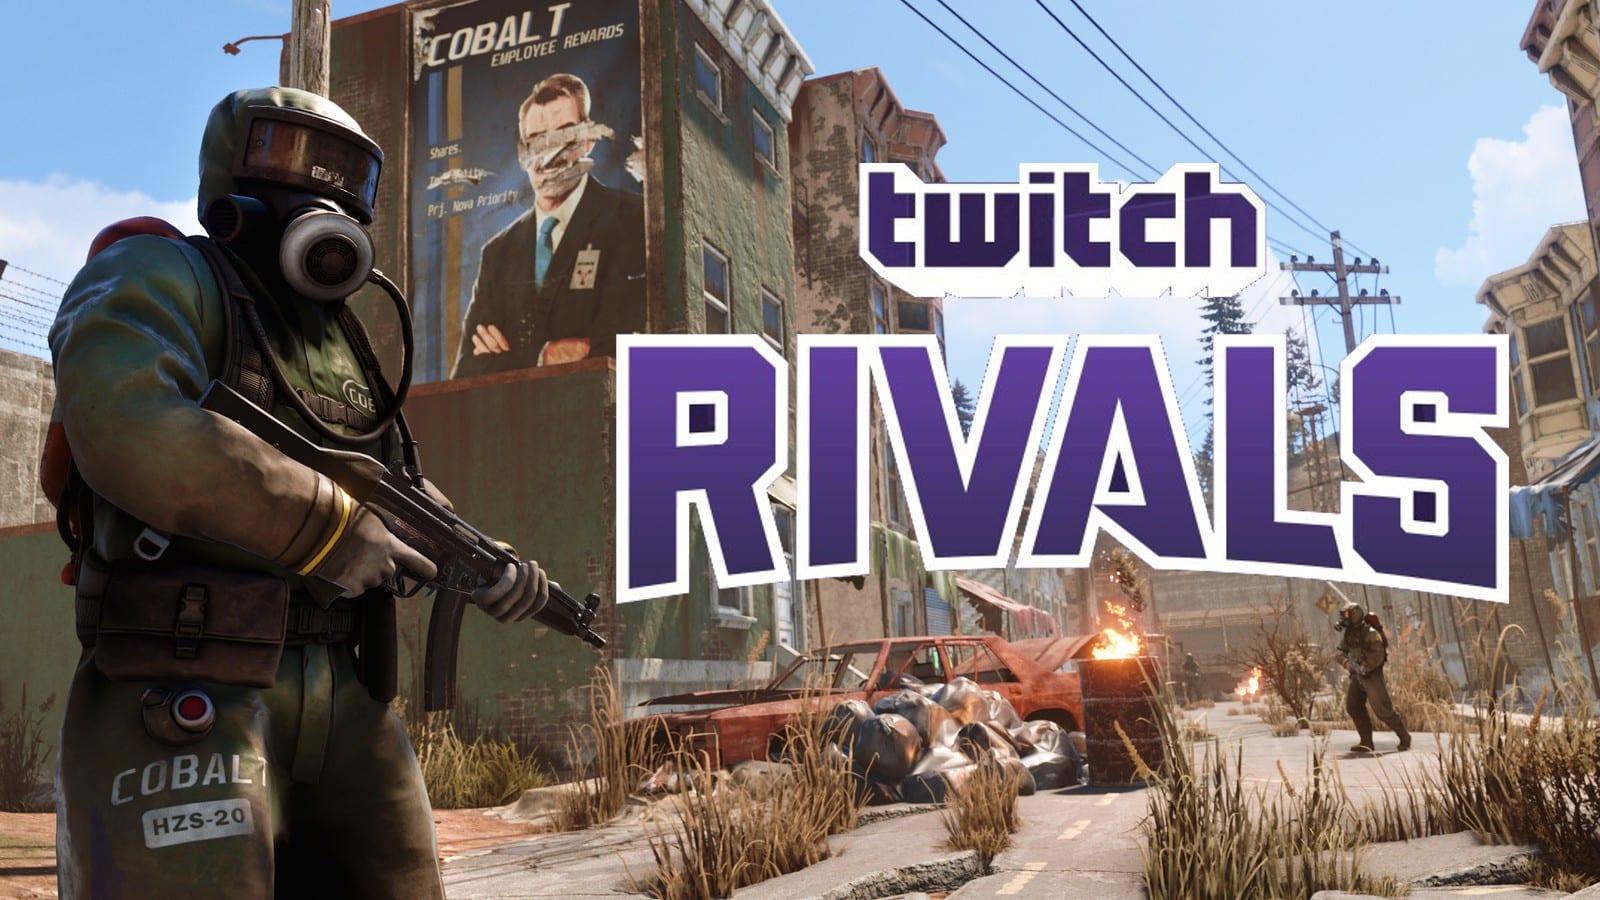 Rust gameplay screenshot with Twitch Rivals logo